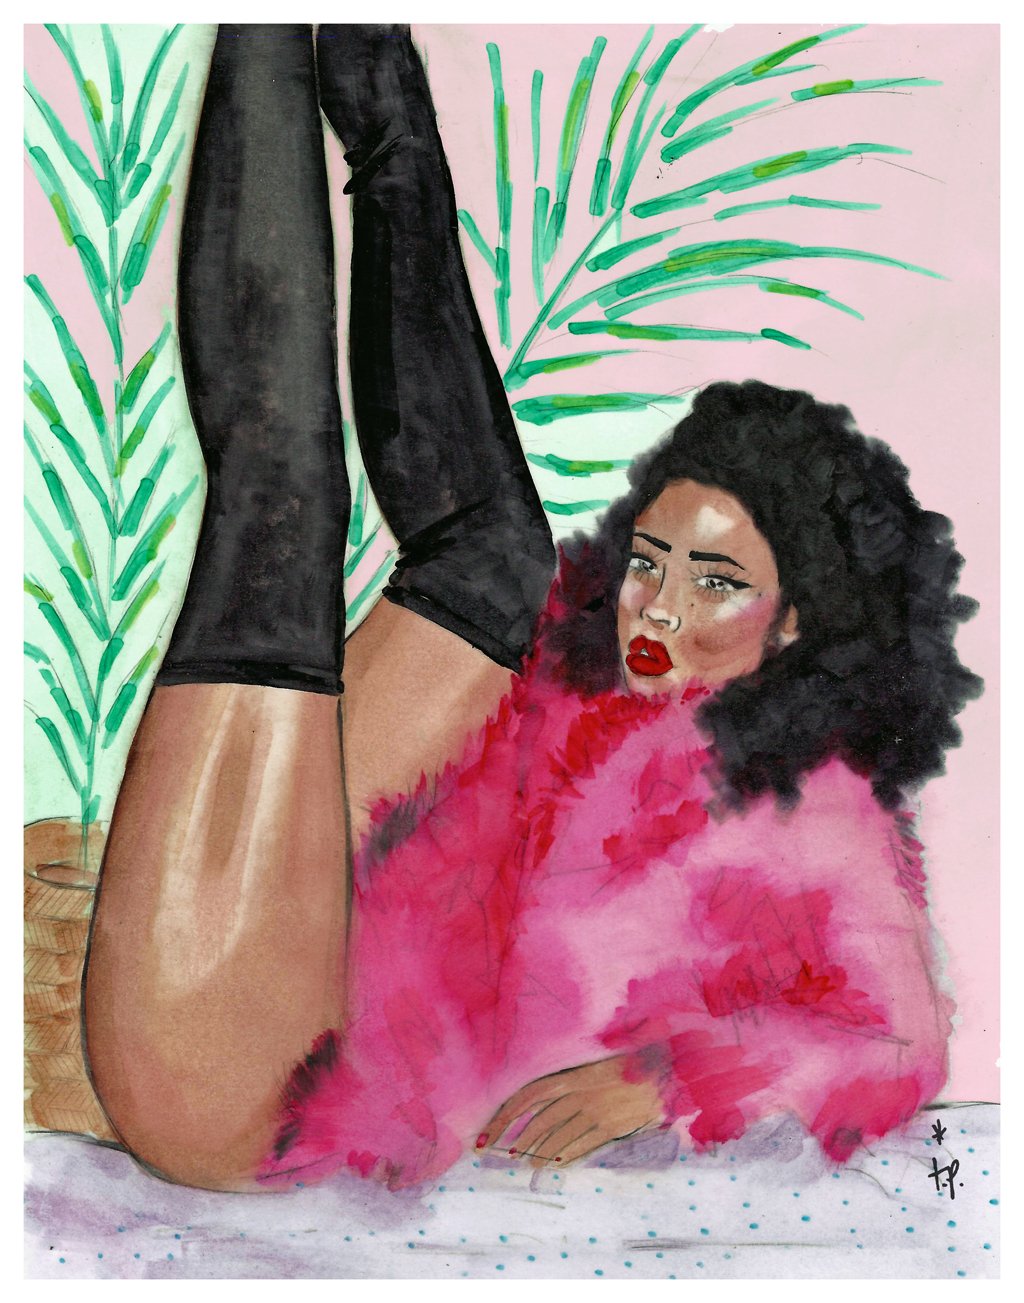 Woman Wearing a Pink Fur and High Boots Art Print Illustration By Tatiana Poblah